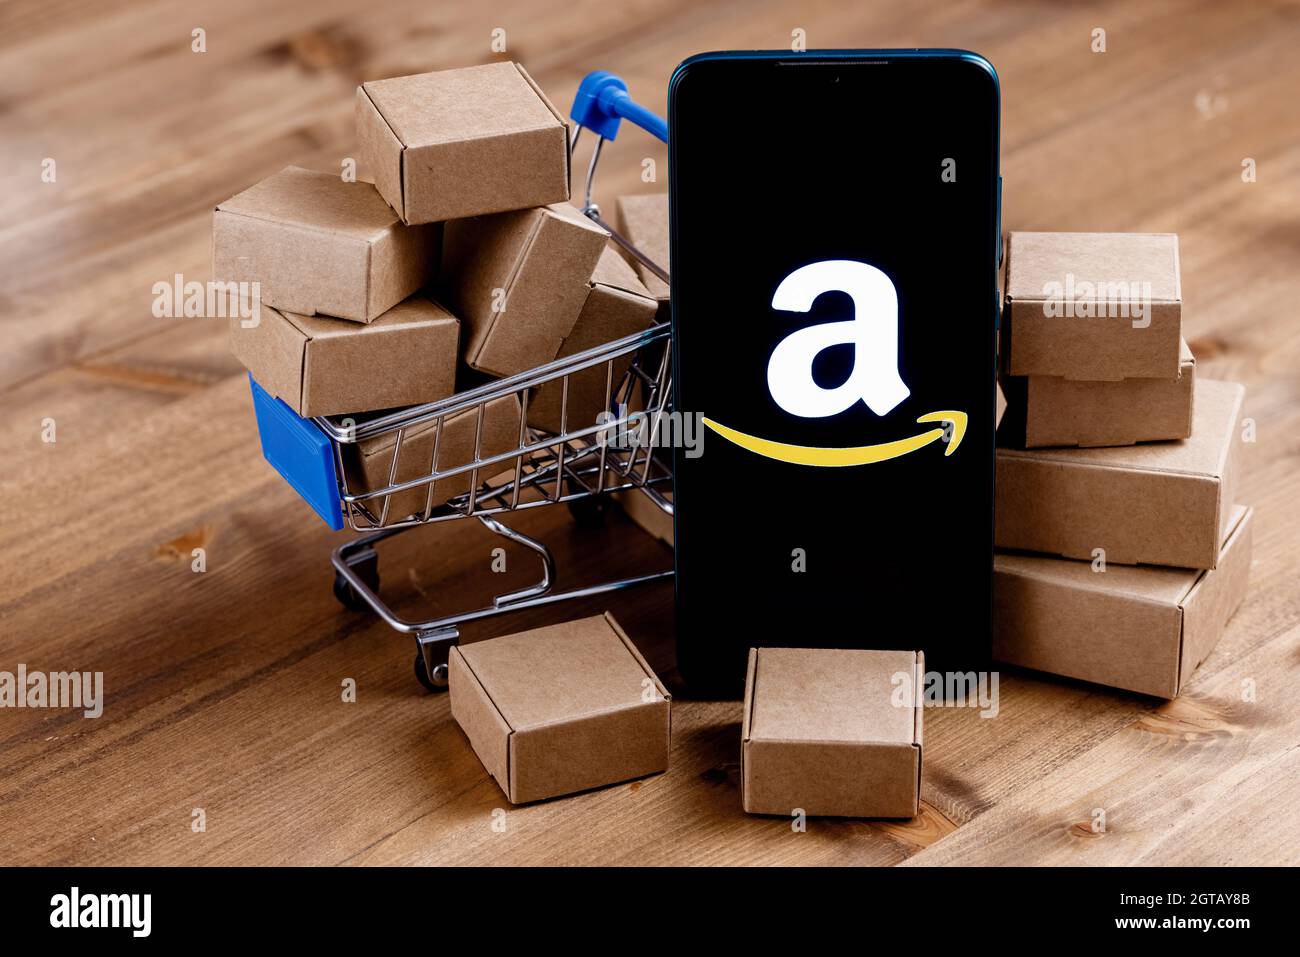 Smartphone with Amazon logo on the screen, shopping cart and parcels Stock  Photo - Alamy